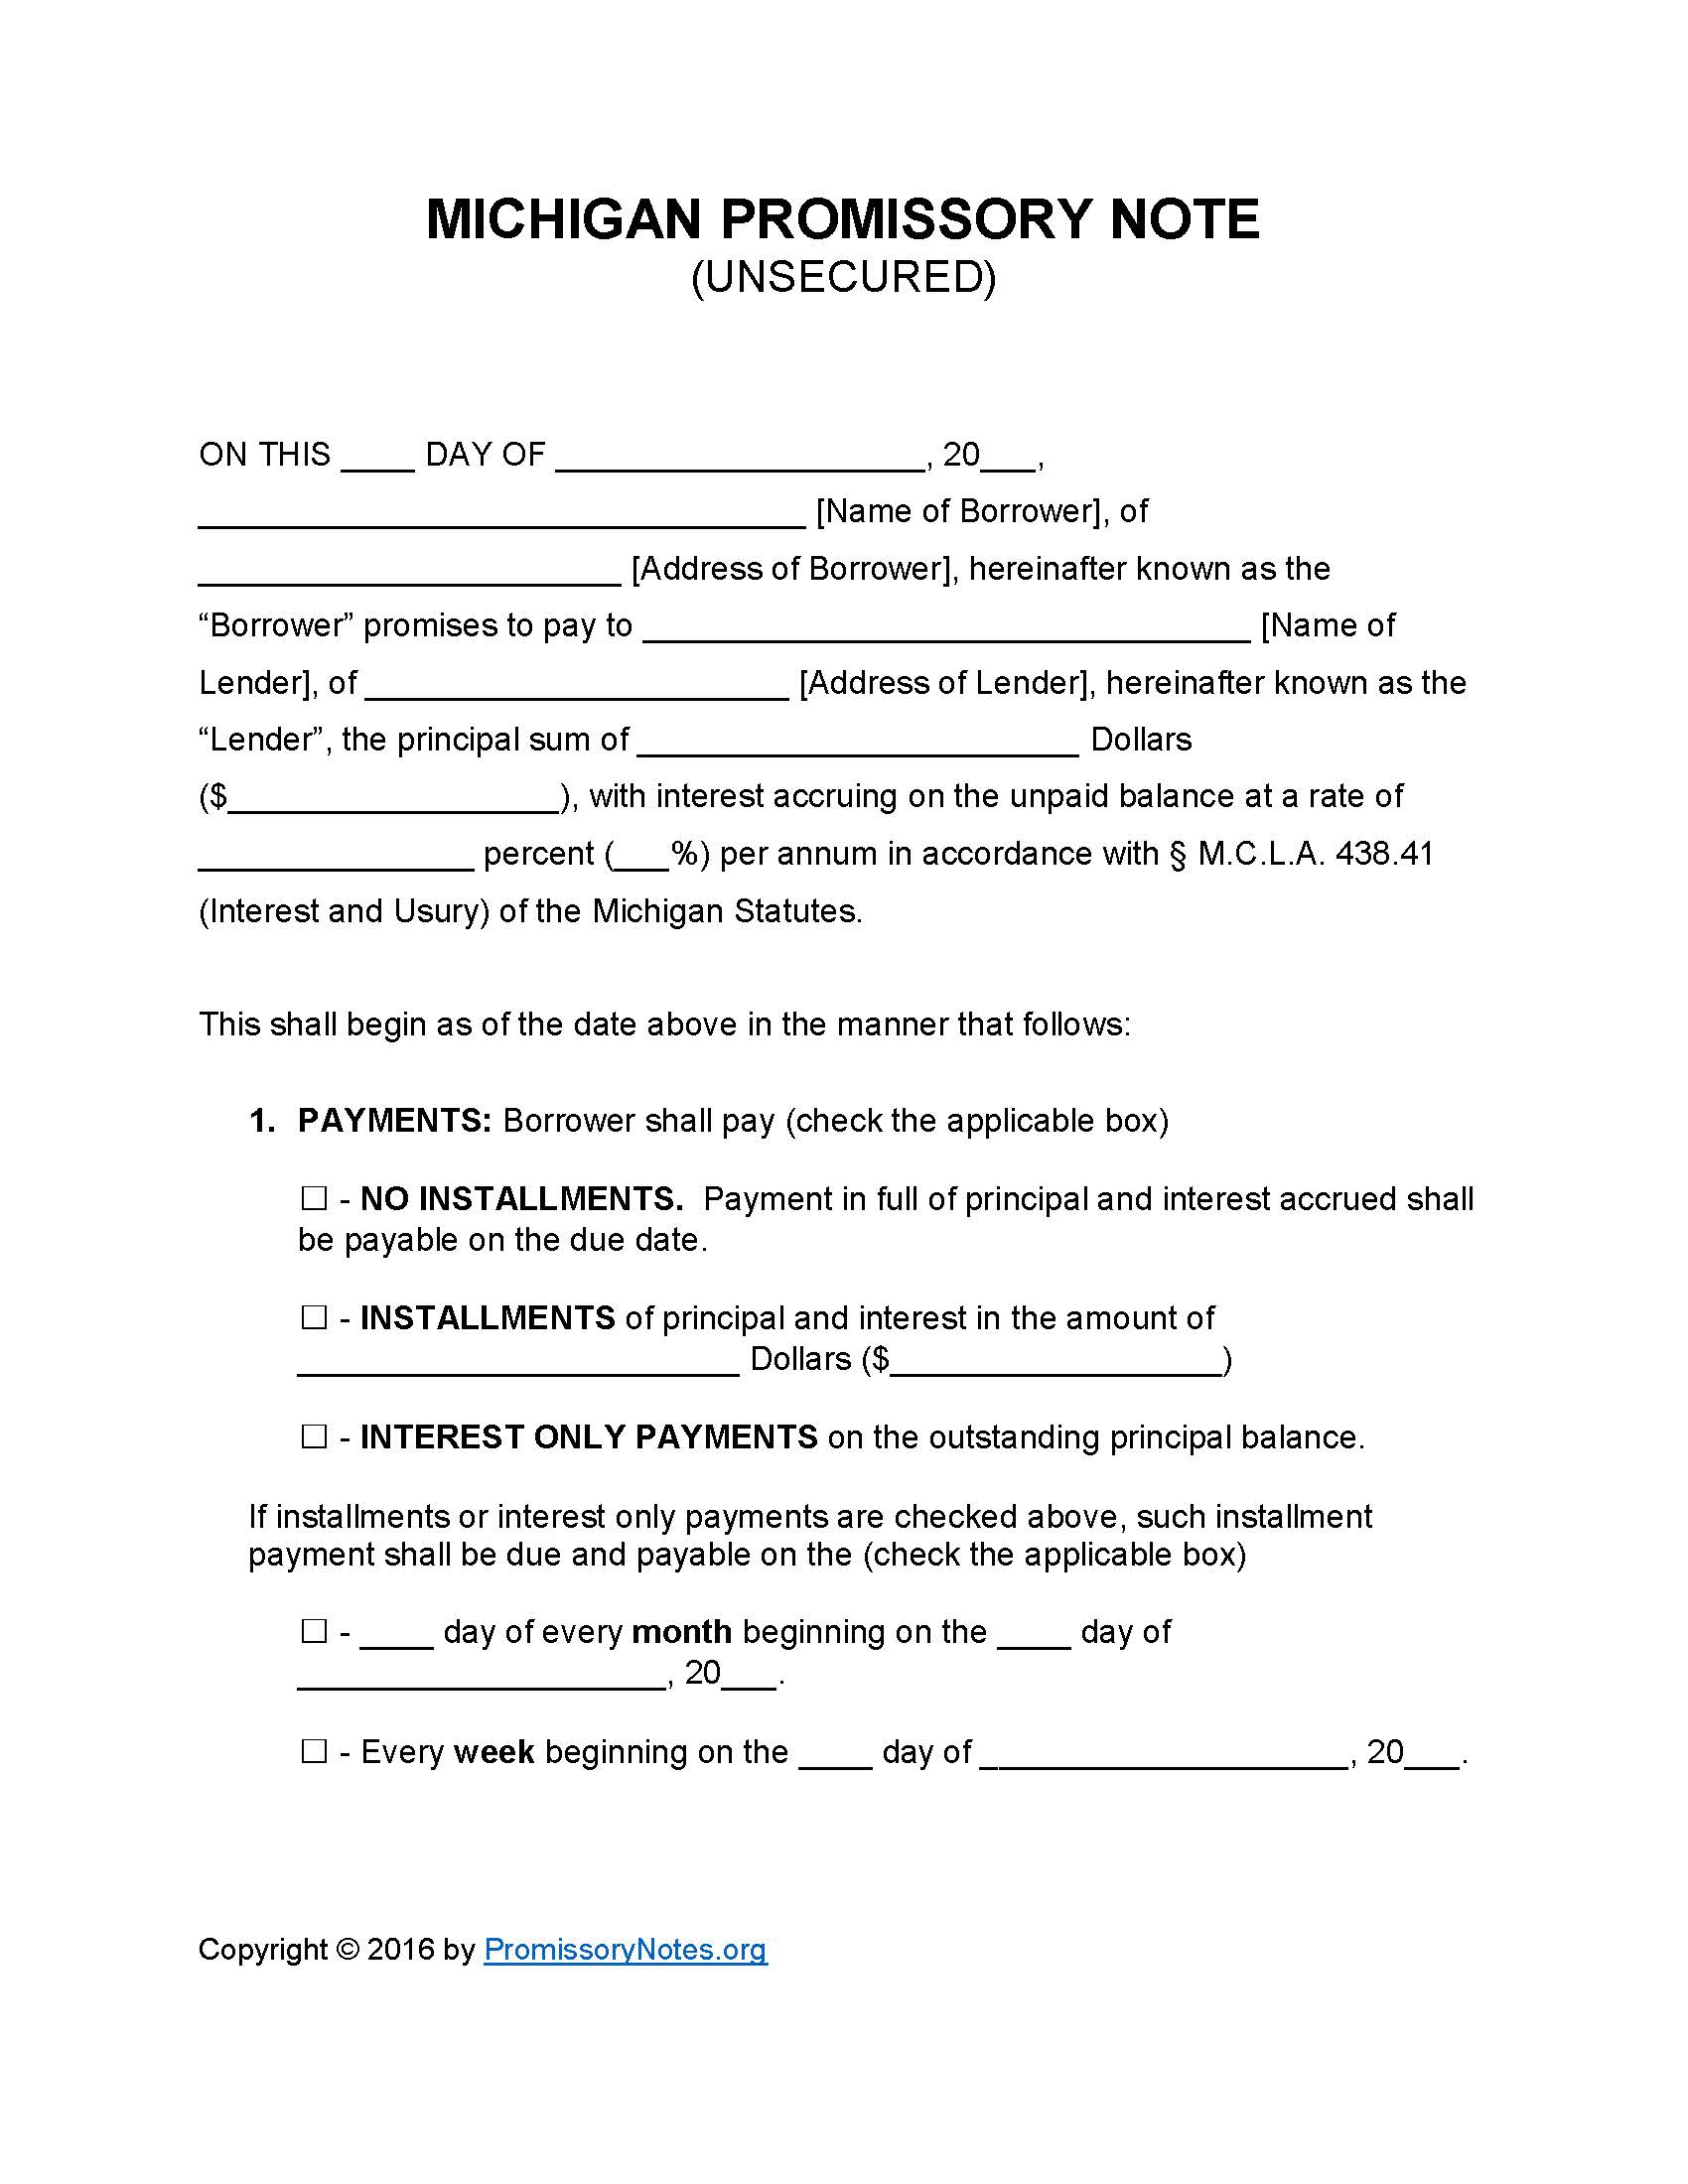 michigan-unsecured-promissory-note-form